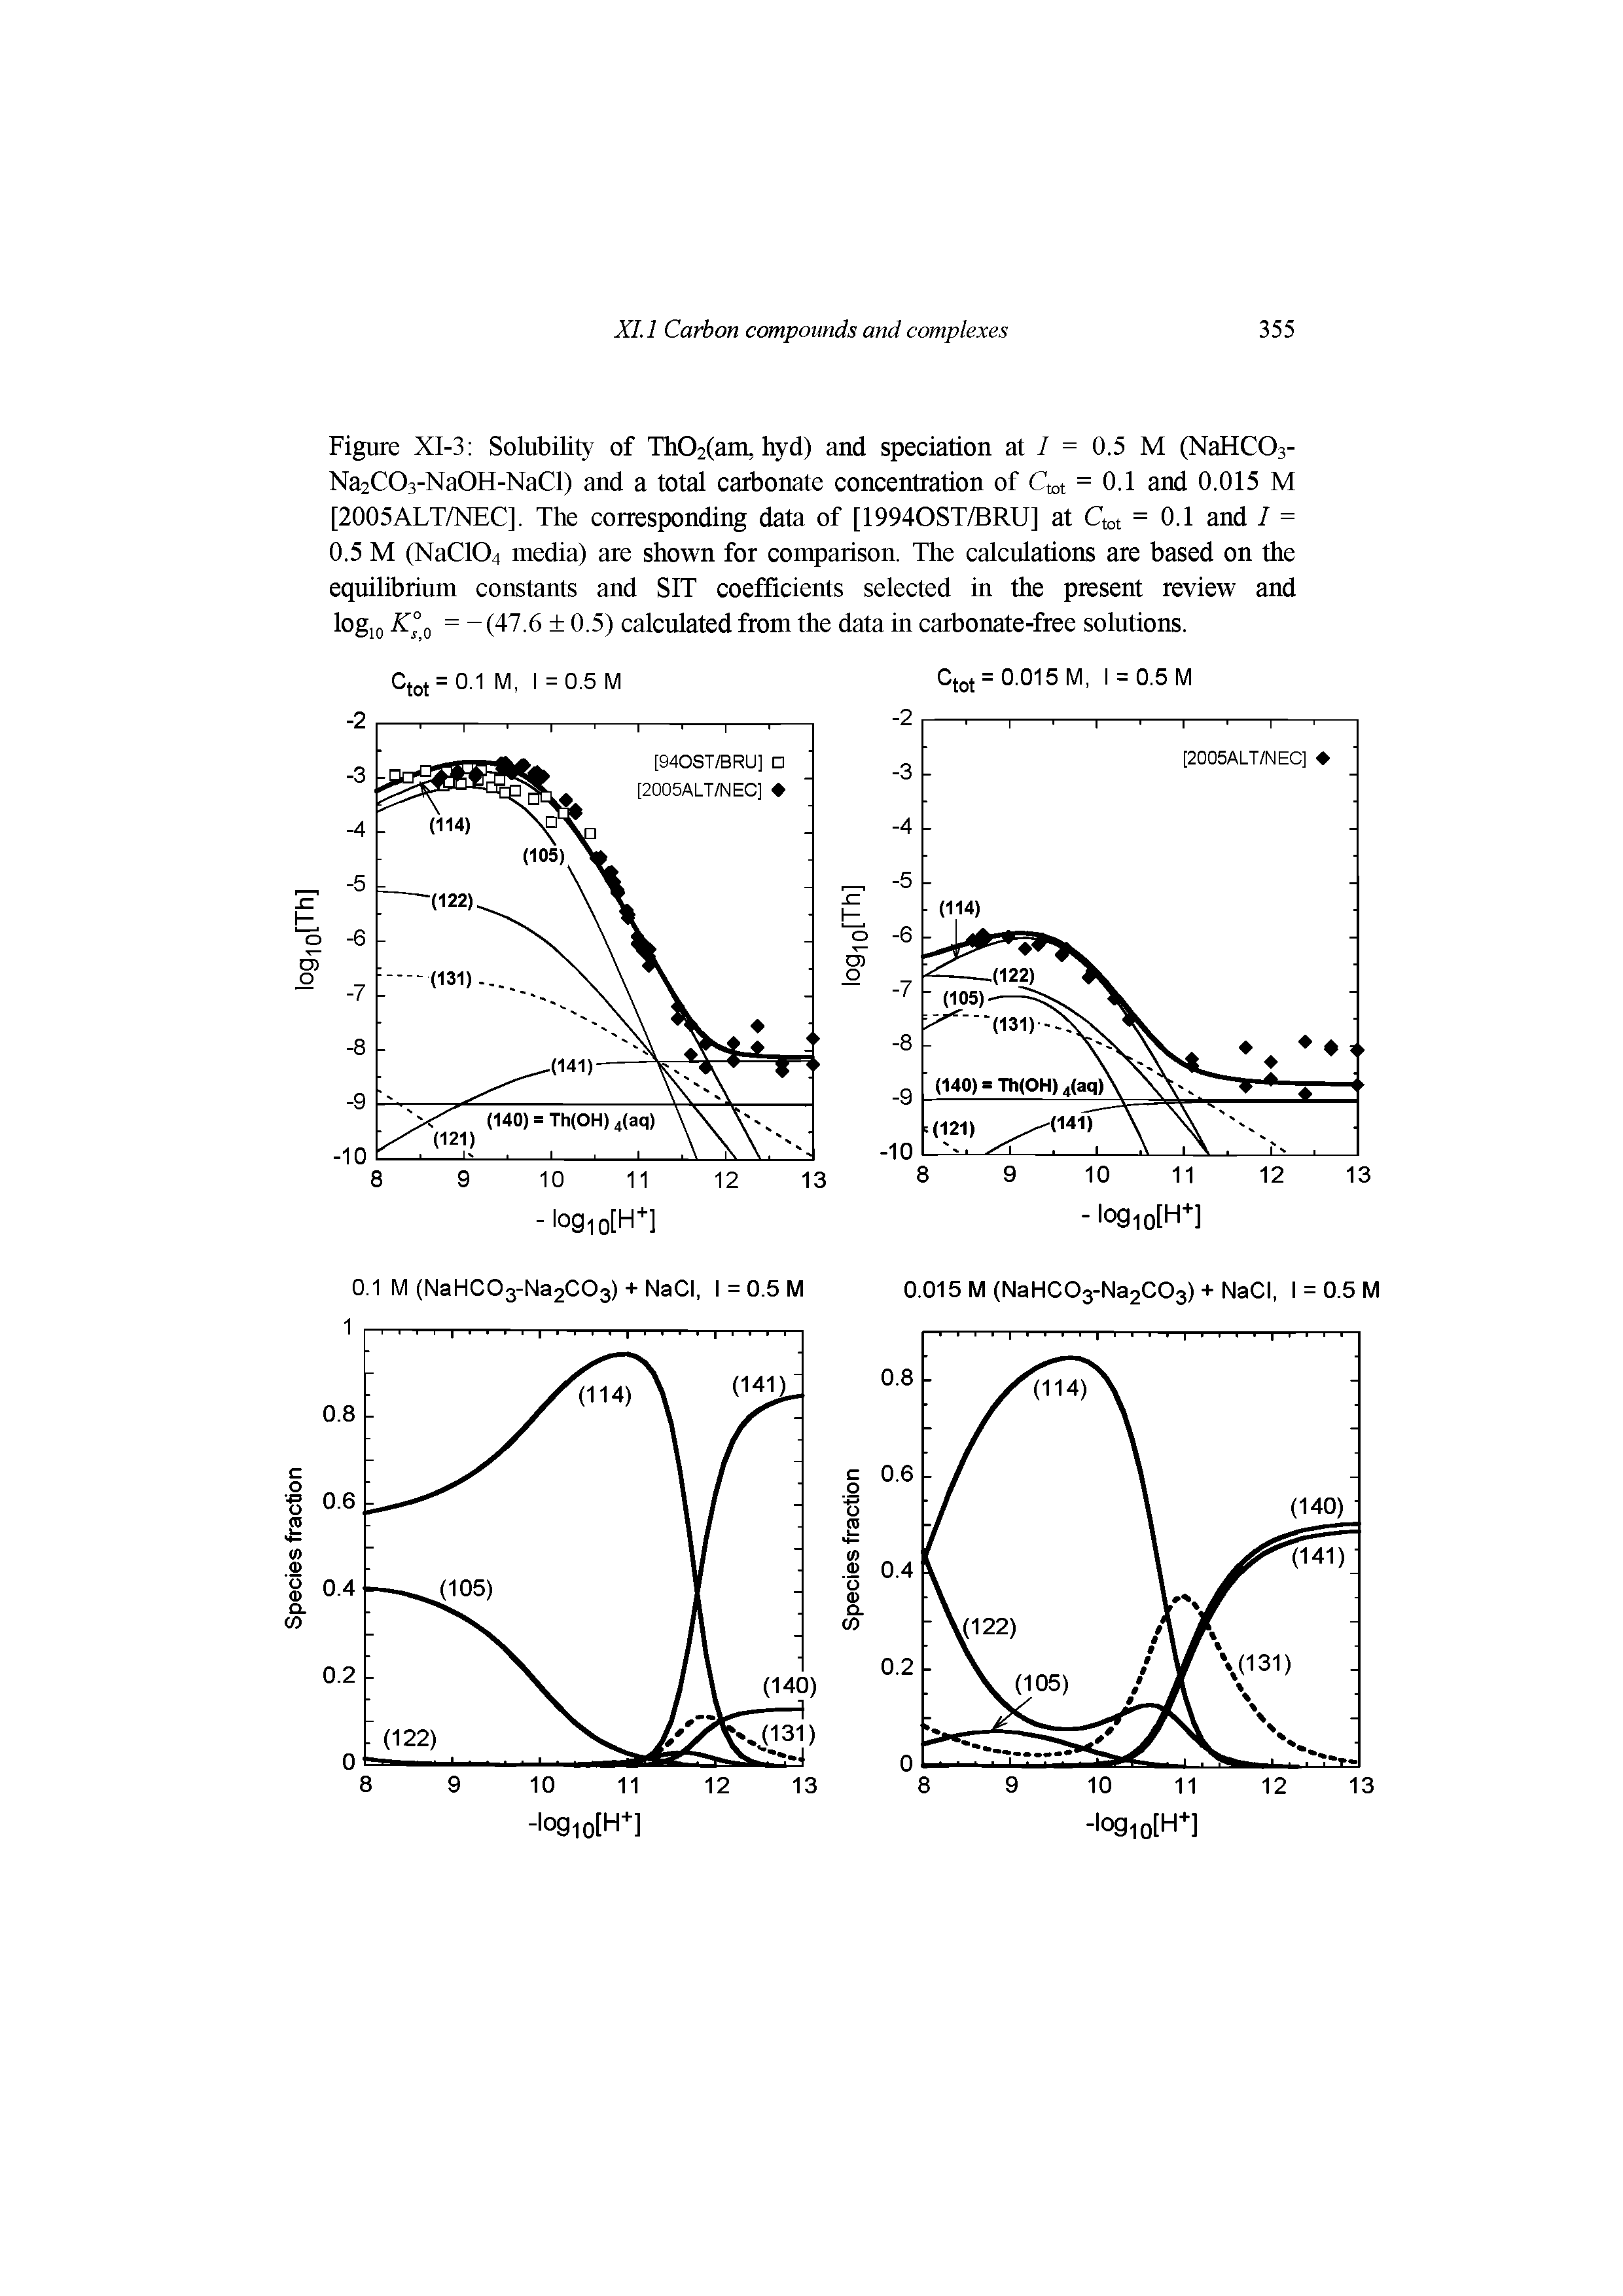 Figure XI-3 Solubility of Th02(am, hyd) and speciation at / = 0.5 M (NaHCOs-Na2C03-Na0H-NaCl) and a total carbonate concentration of Ctot = 0.1 and 0.015 M [2005ALT/NEC]. The corresponding data of [19940ST/BRU] at Ctot = 0.1 and I = 0.5 M (NaC104 media) are shown for comparison. The calculations are based on the equilibrium constants and SIT coefficients selected in the present review and logio = -(47.6 + 0.5) calculated from the data in carbonate-free solutions.